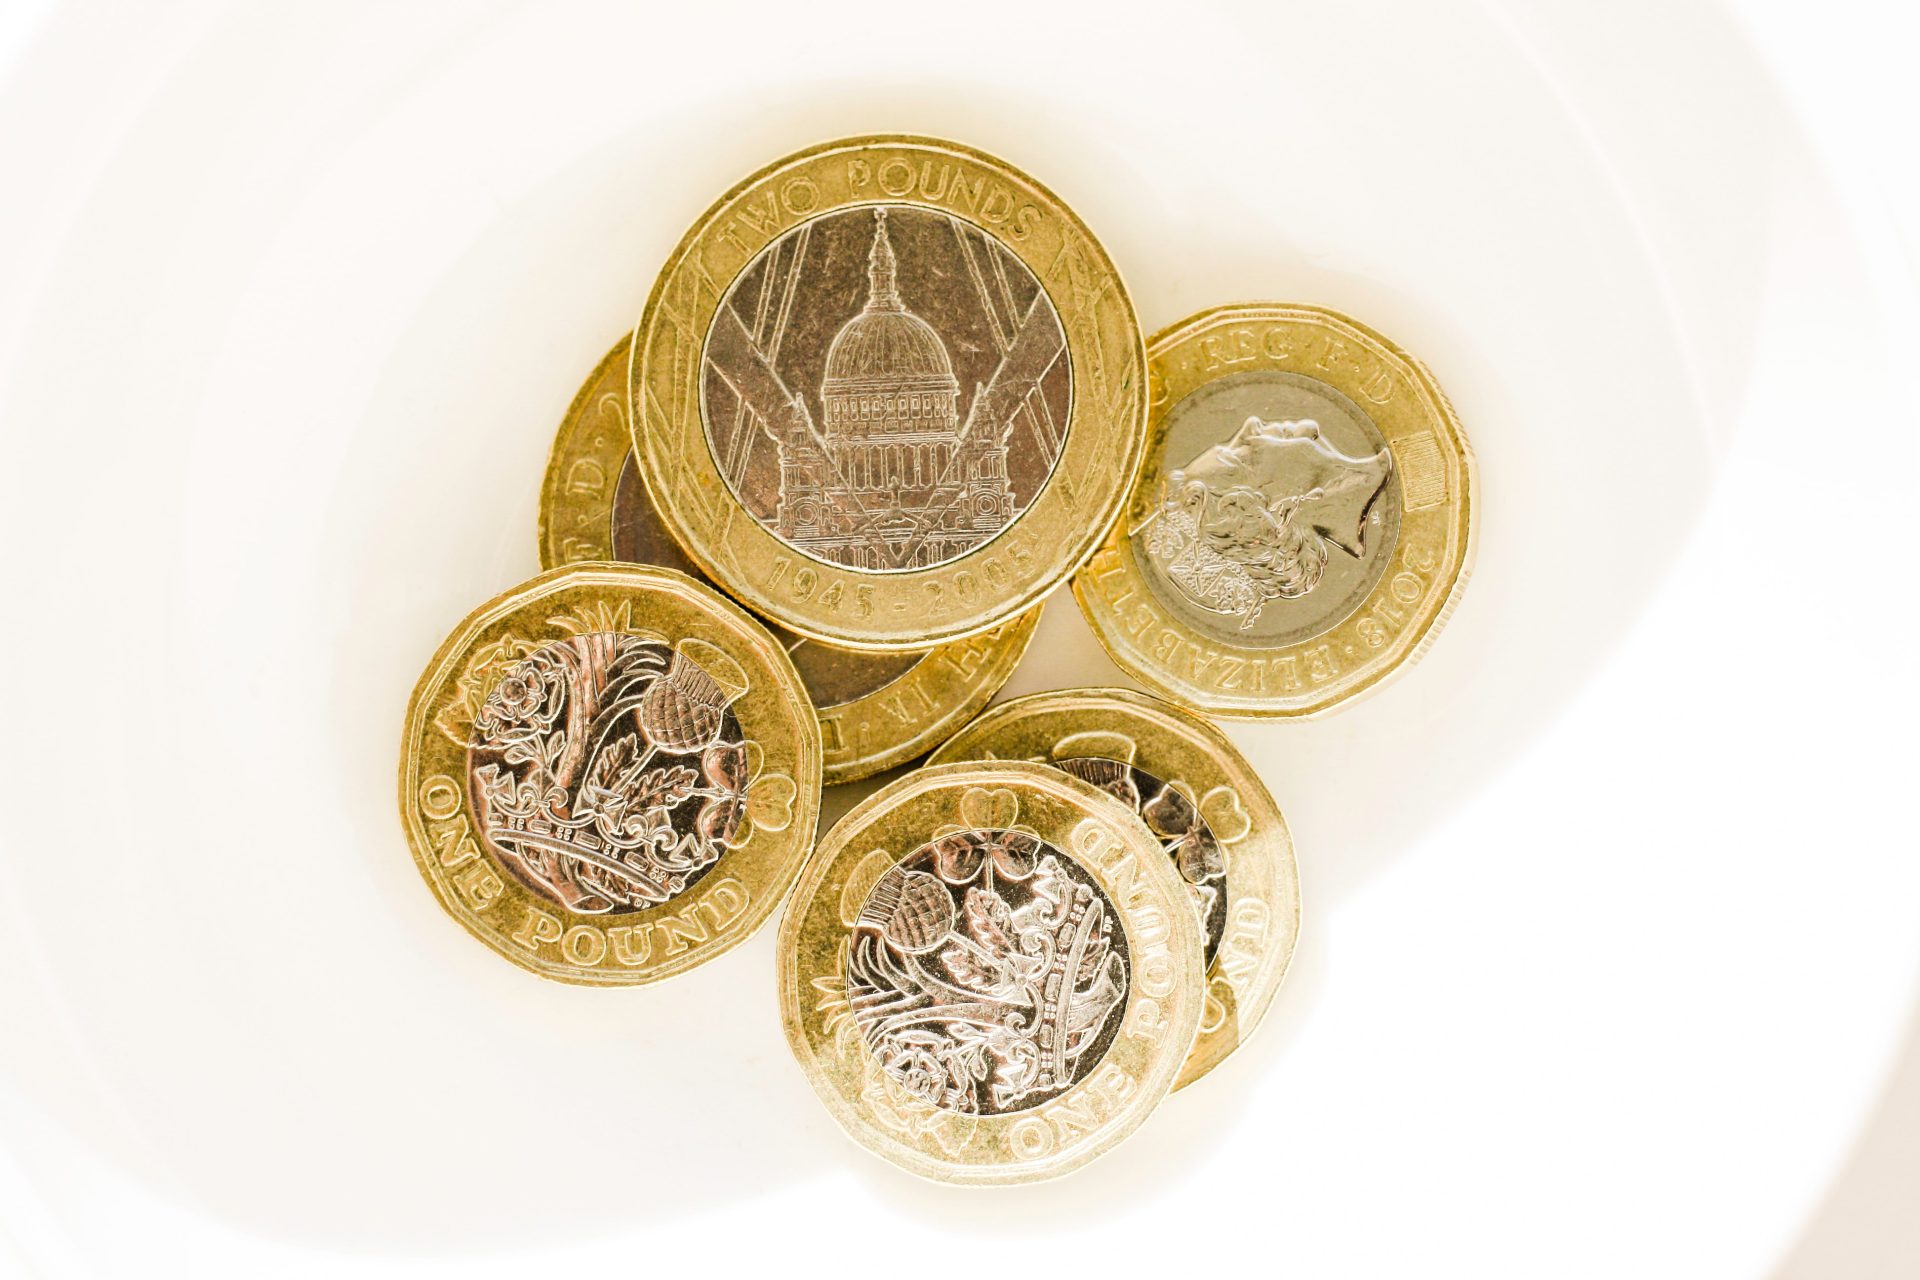 One pound and two pound coins